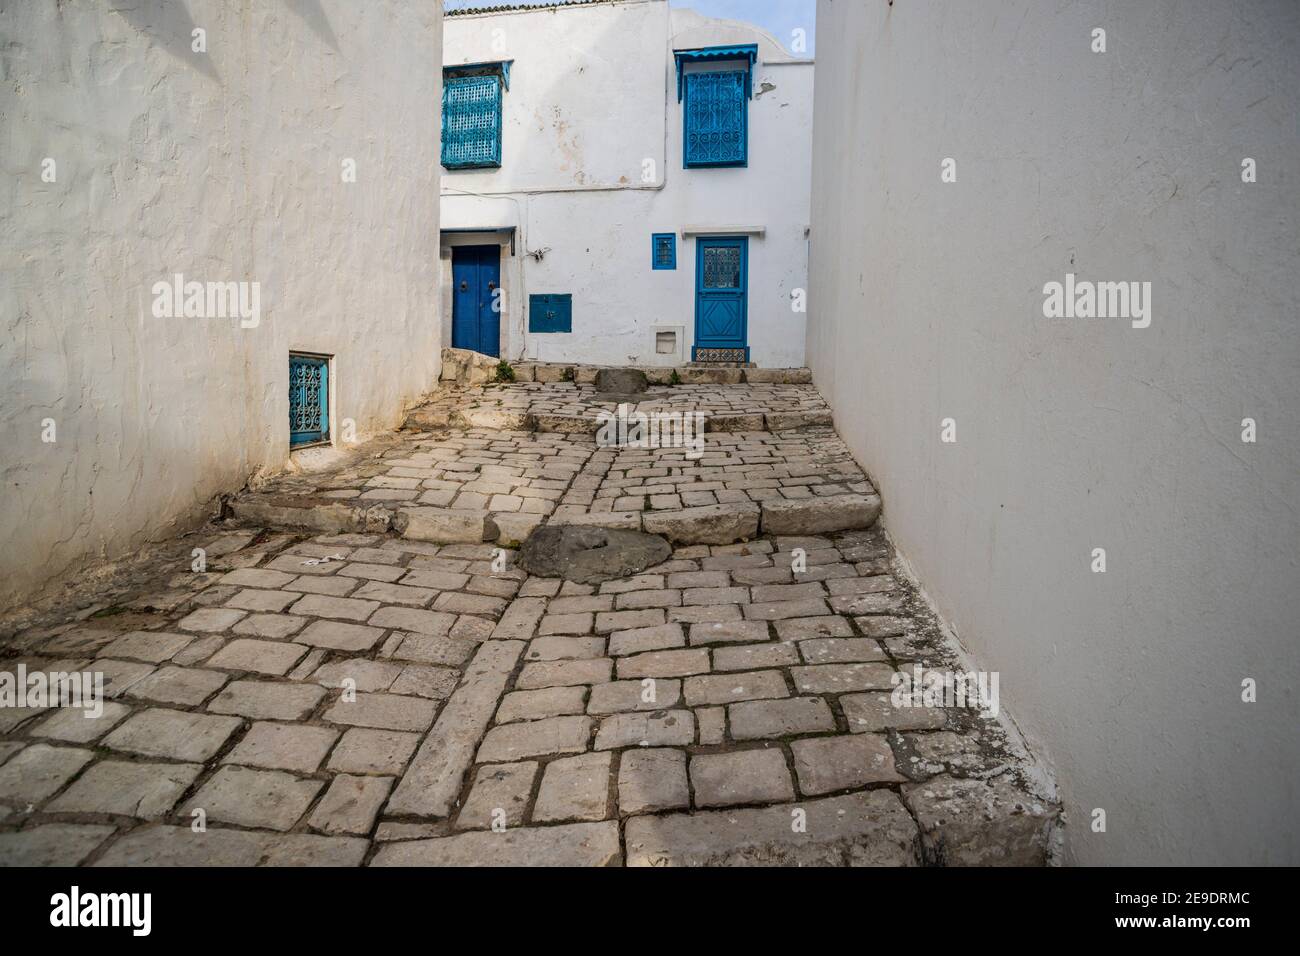 Traditional dwellings along a cobbled hillside street. Sidi Bou Said, the blue and white tourist village overlooking the Mediterranean Sea. Tunisia, Stock Photo